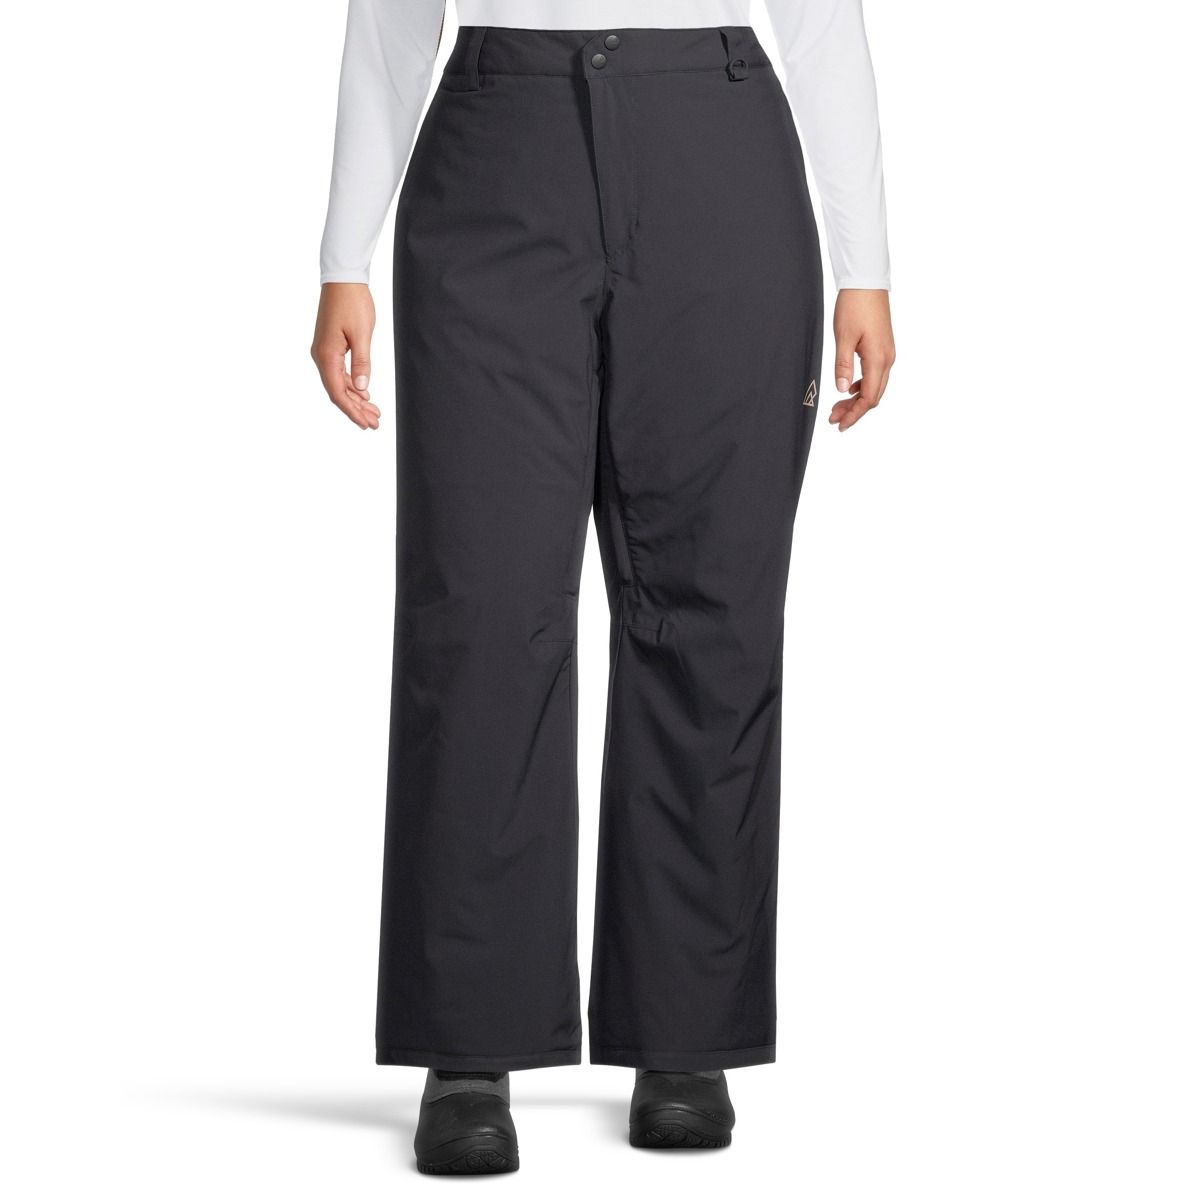 Ripzone Women's Plus Size Caledon Insulated Snow Pants